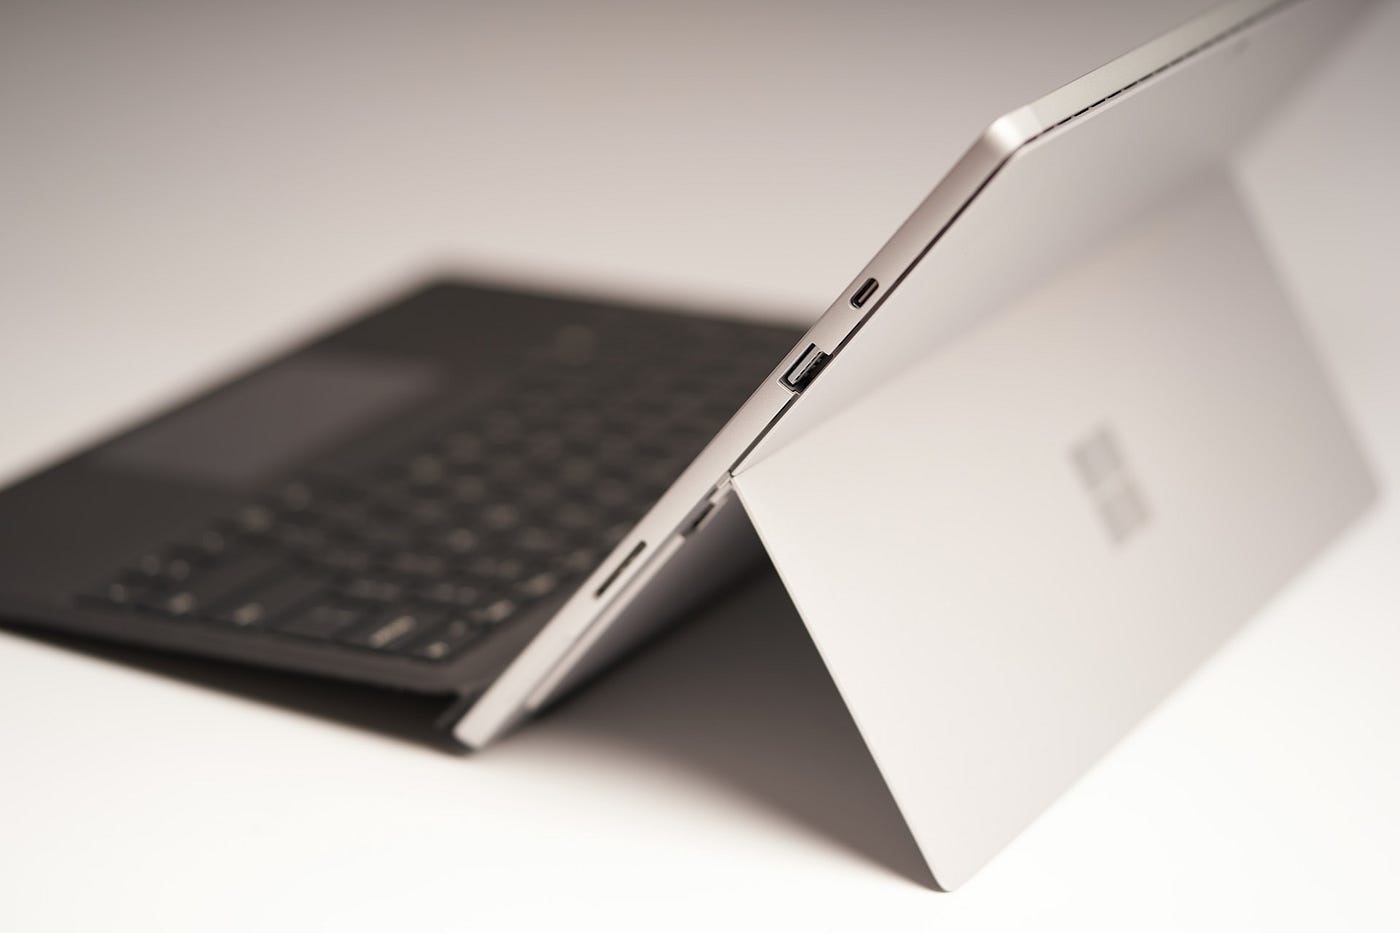 What do declining sales of Microsoft's Surface tell us about the